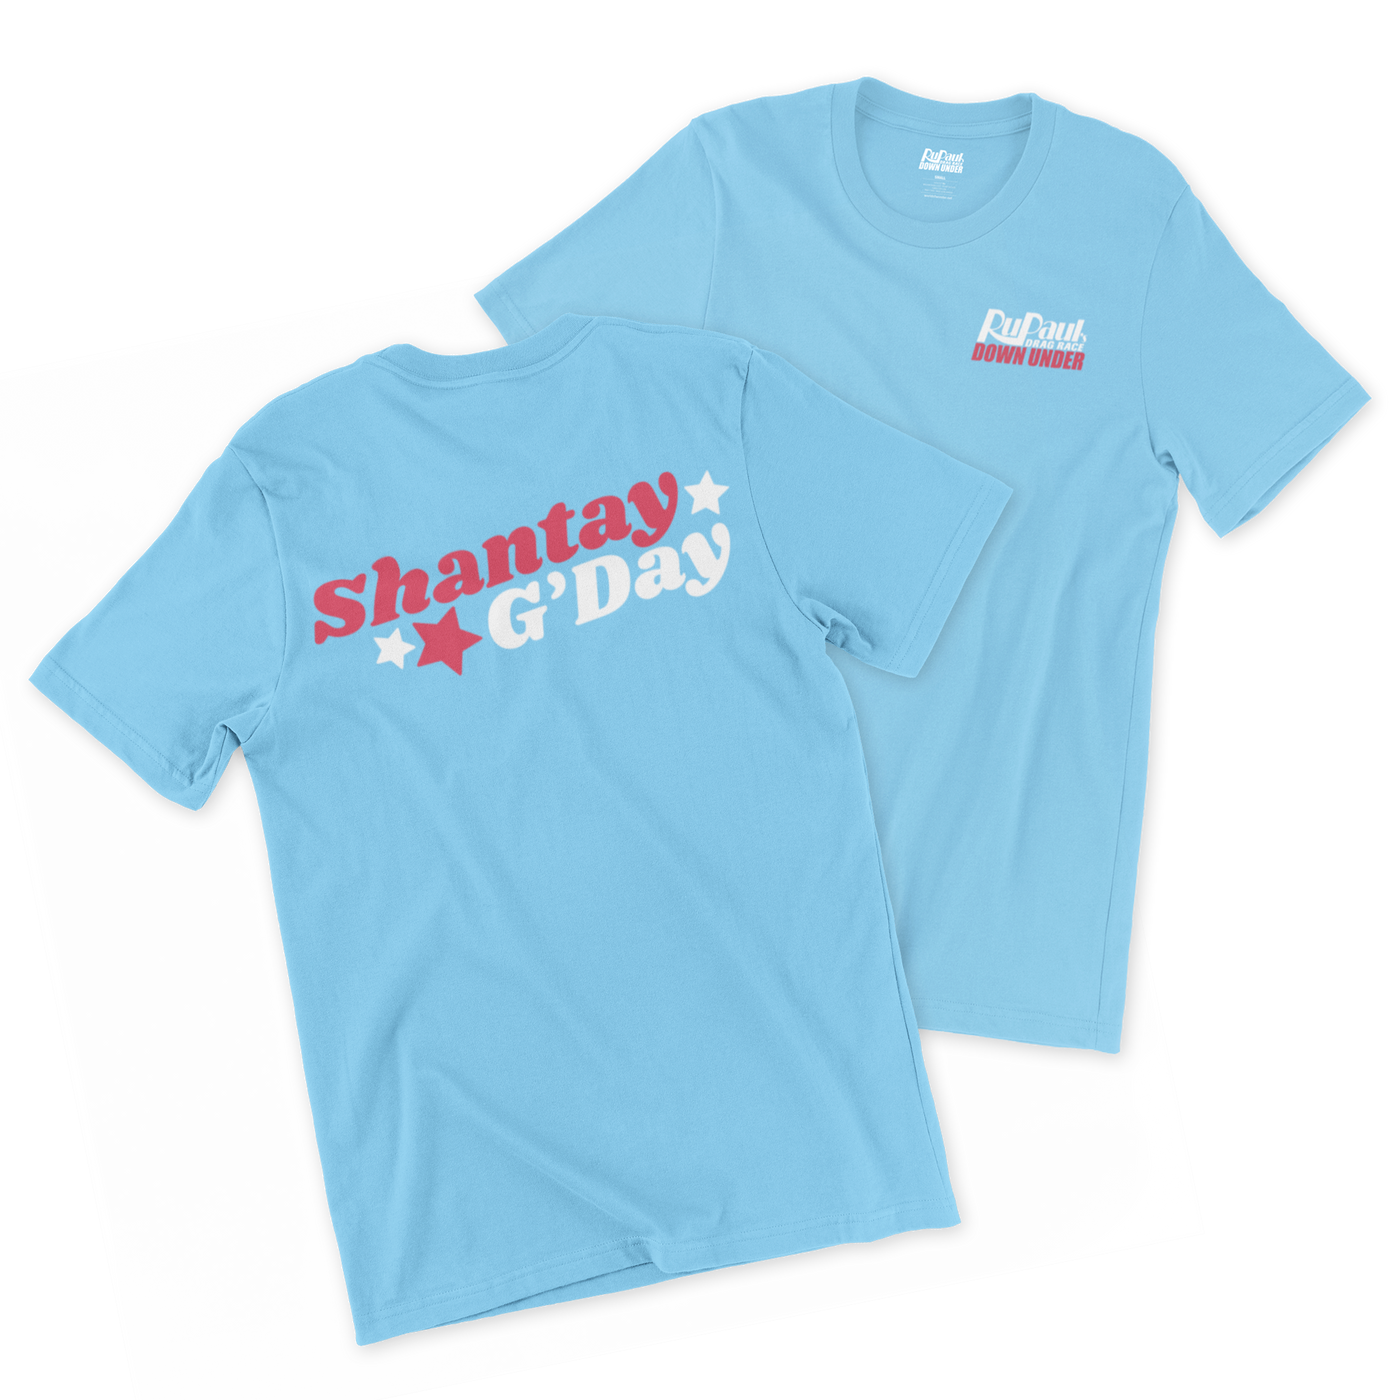 Shantay G'Day T-Shirt - AU ONLY